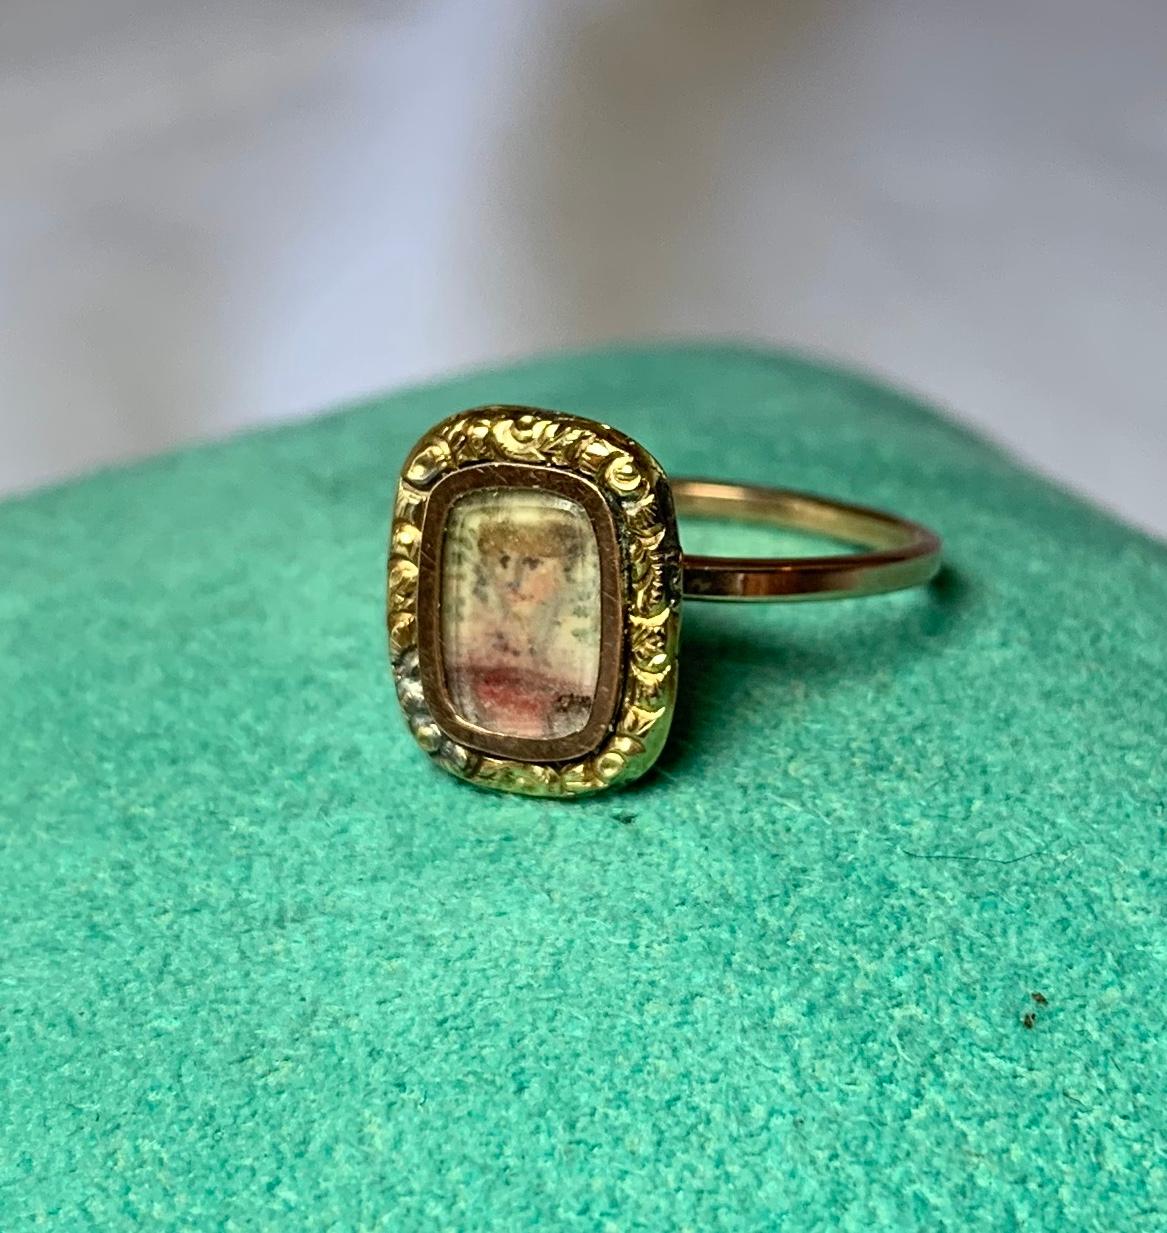 A very early and rare Georgian Portrait Miniature Ring.  The Portrait Miniature is set within the central crystal covered compartment of the ring.  This is very early - most likely dating to the 18th Century.  The portrait is surrounded by a gold